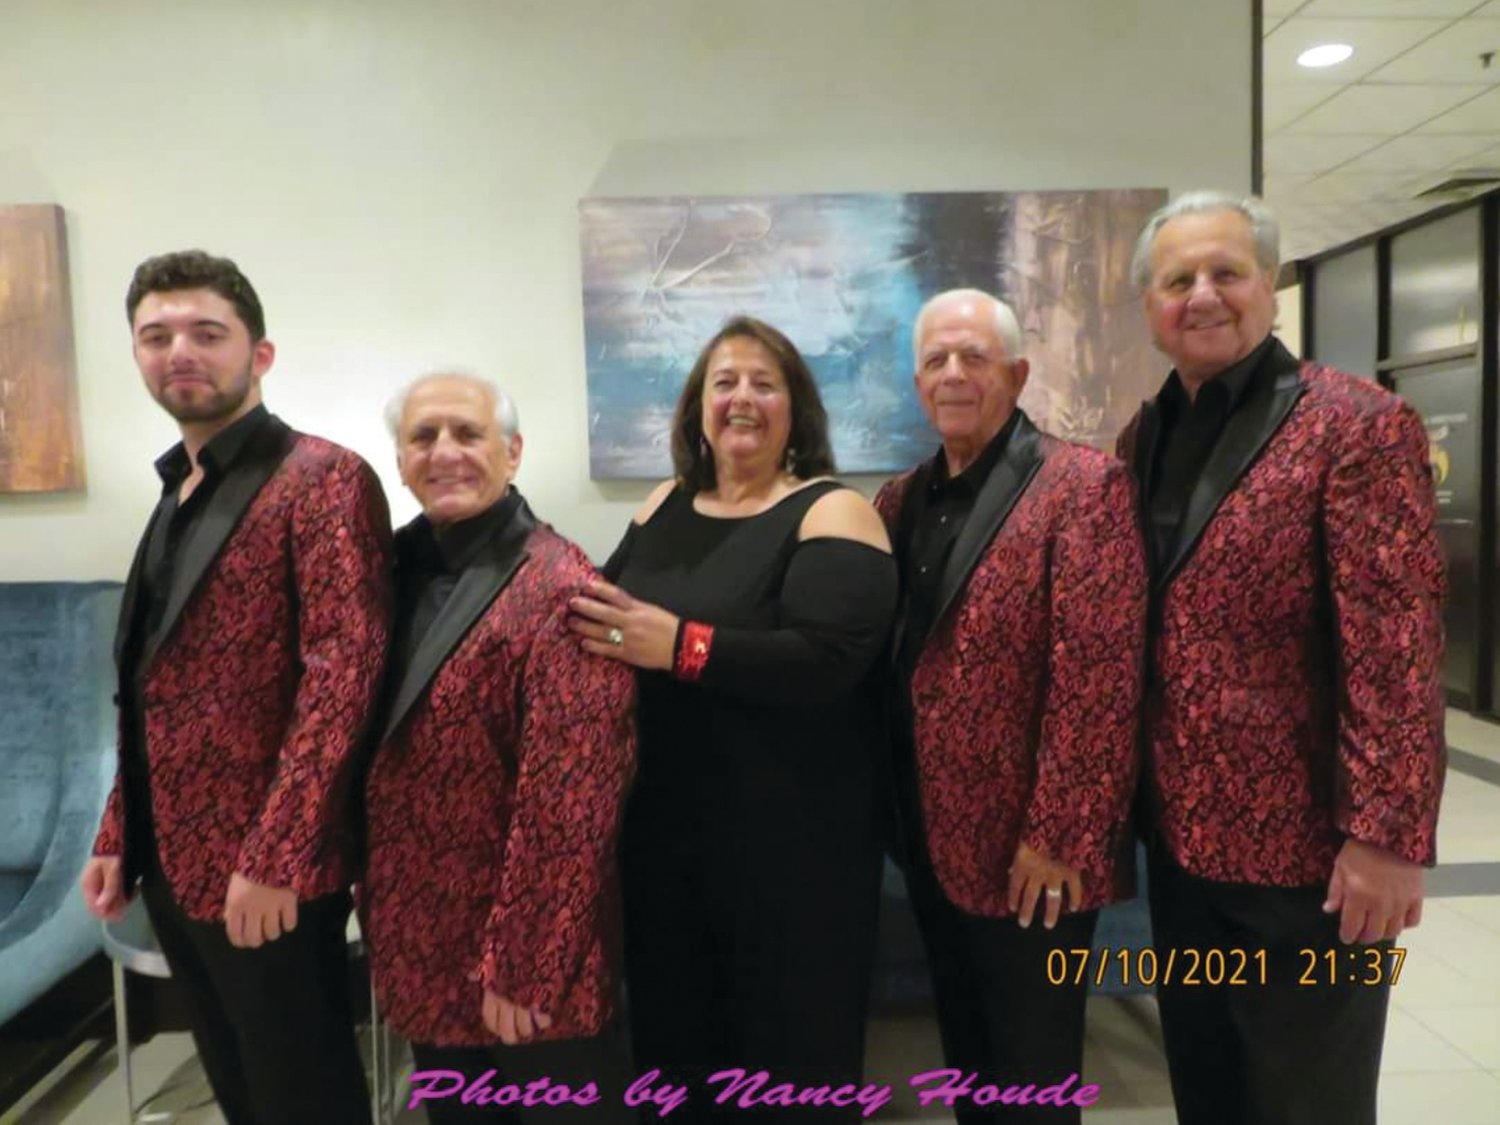 CLASSIC CAST: Ron Giorgio, Ron Iacobucci, Maria Russo, Jack Mento and Peter Coneconte will be singing their famous doo-wop and oldies songs on Saturday, March 18 during a unique fundraiser at the Santa Maria Di Prata Society hall in Cranston.